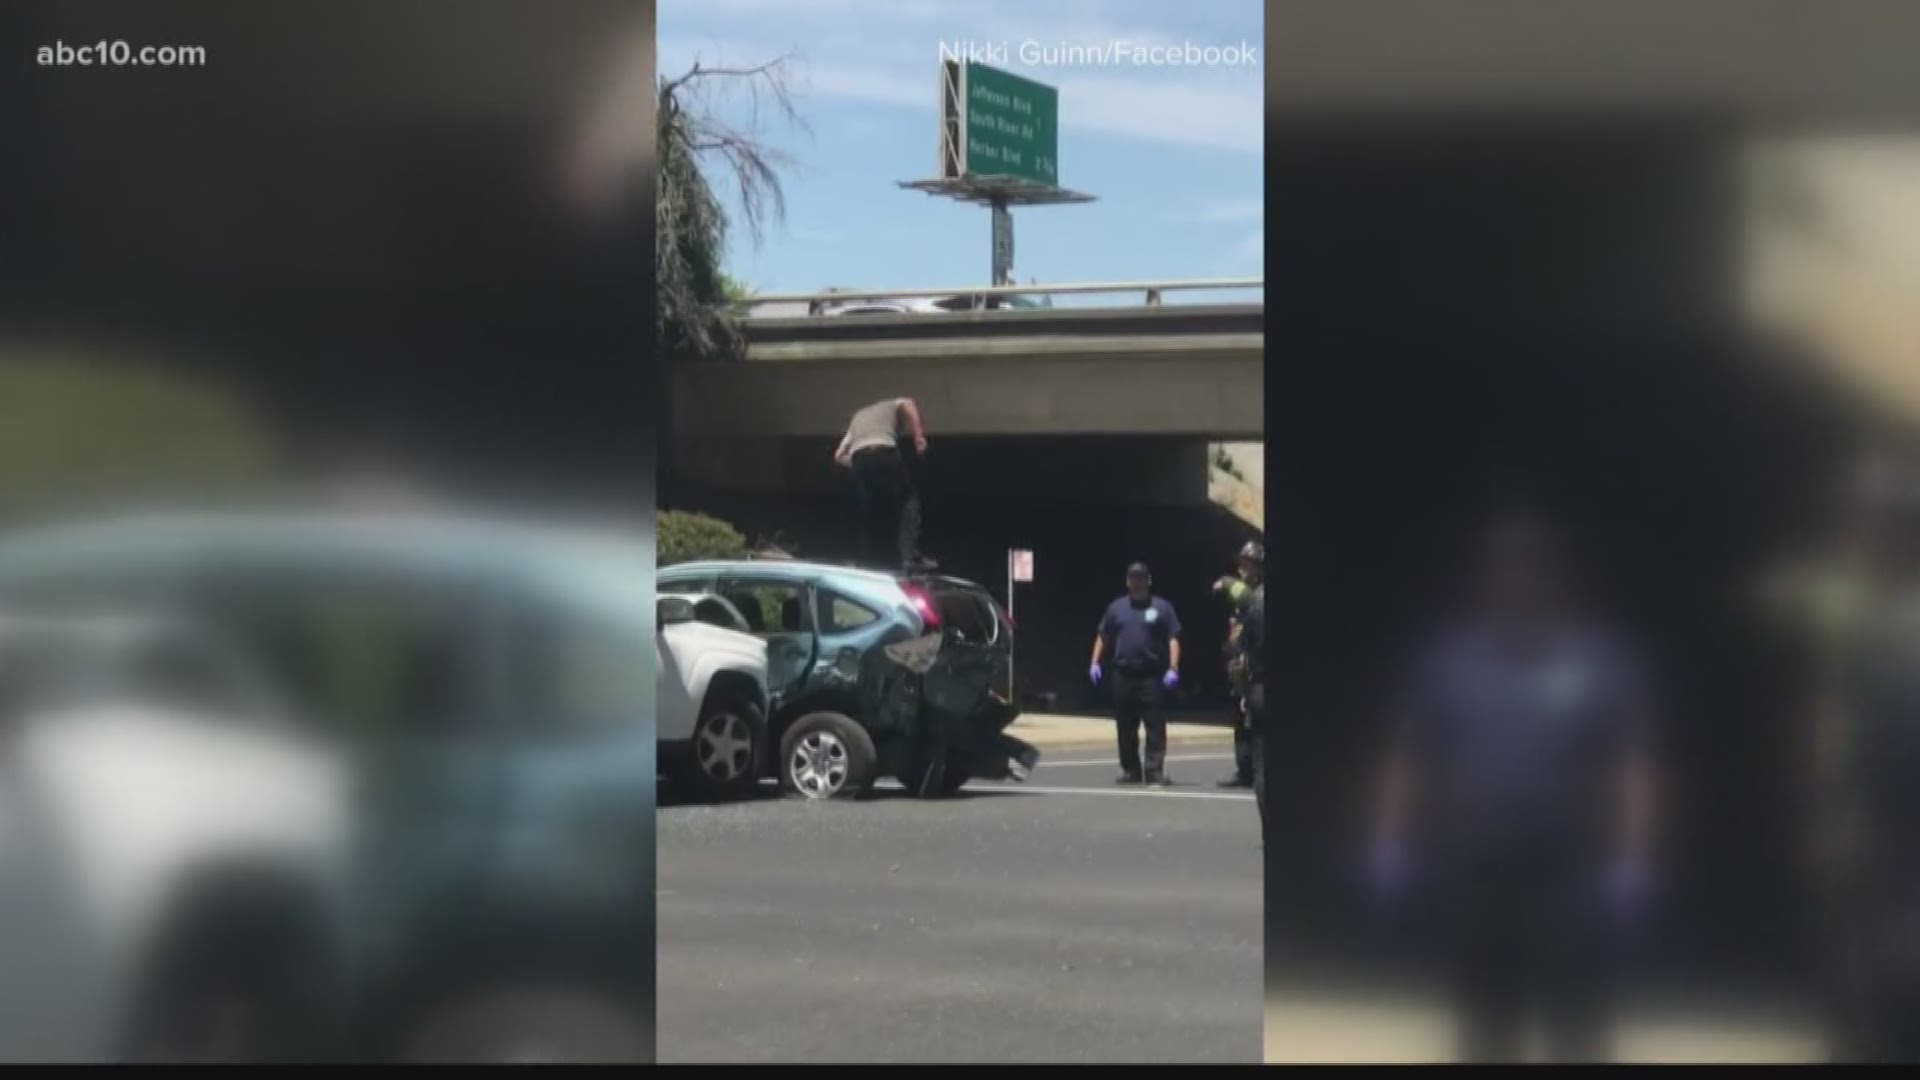 Sacramento Police arrested a man following a road rage incident Monday.